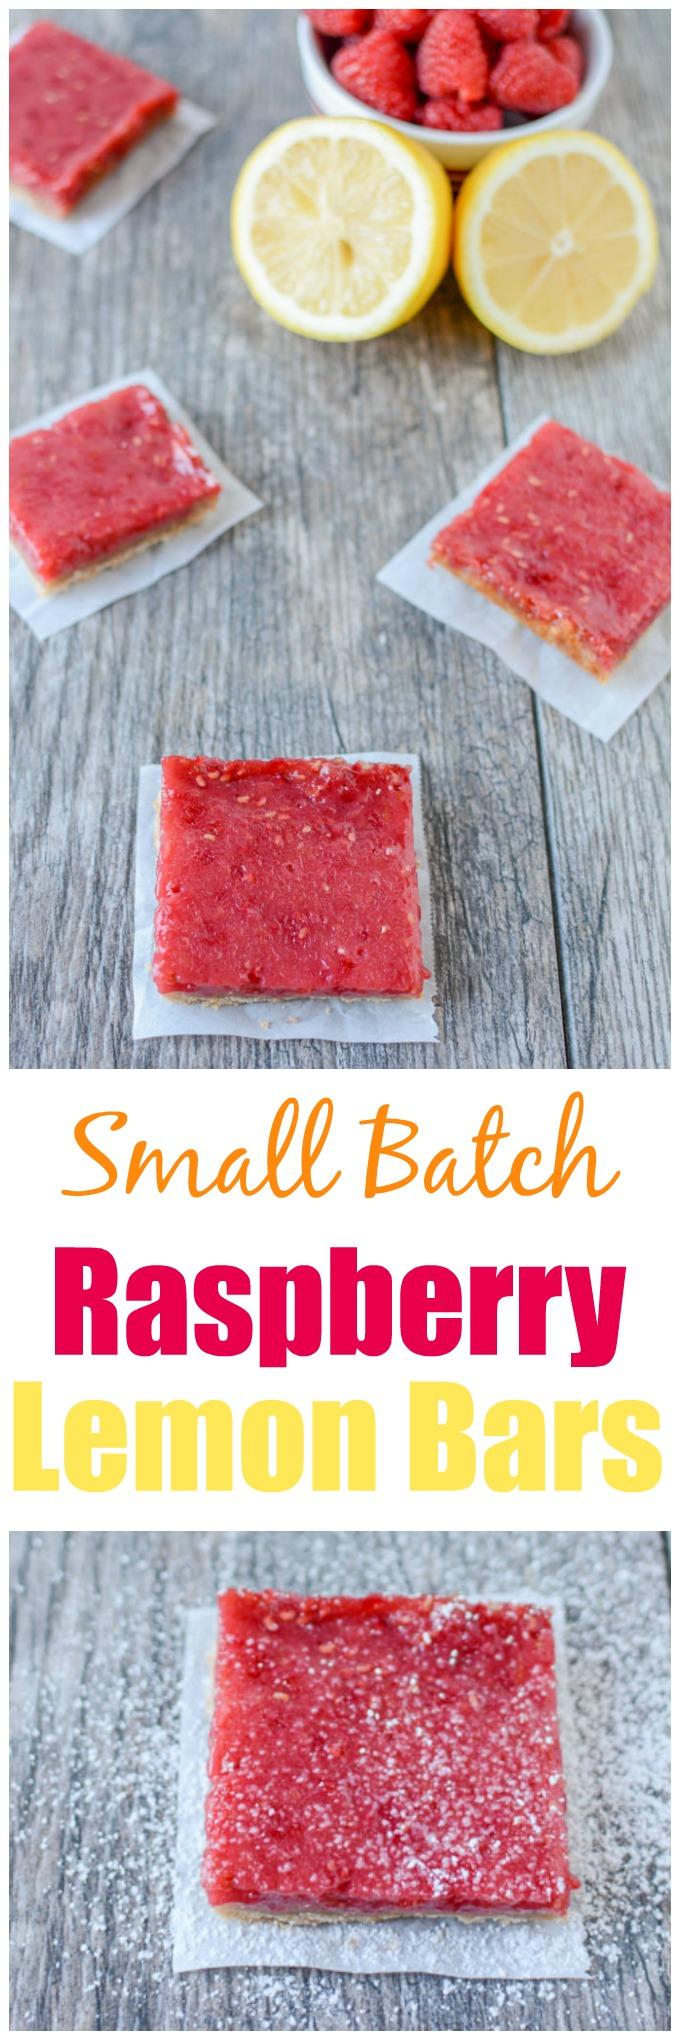 These Small Batch Raspberry Lemon Bars are the perfect dessert. Bursting with flavor, they're easy to make and a small batch means there's just enough to enjoy, without going overboard!